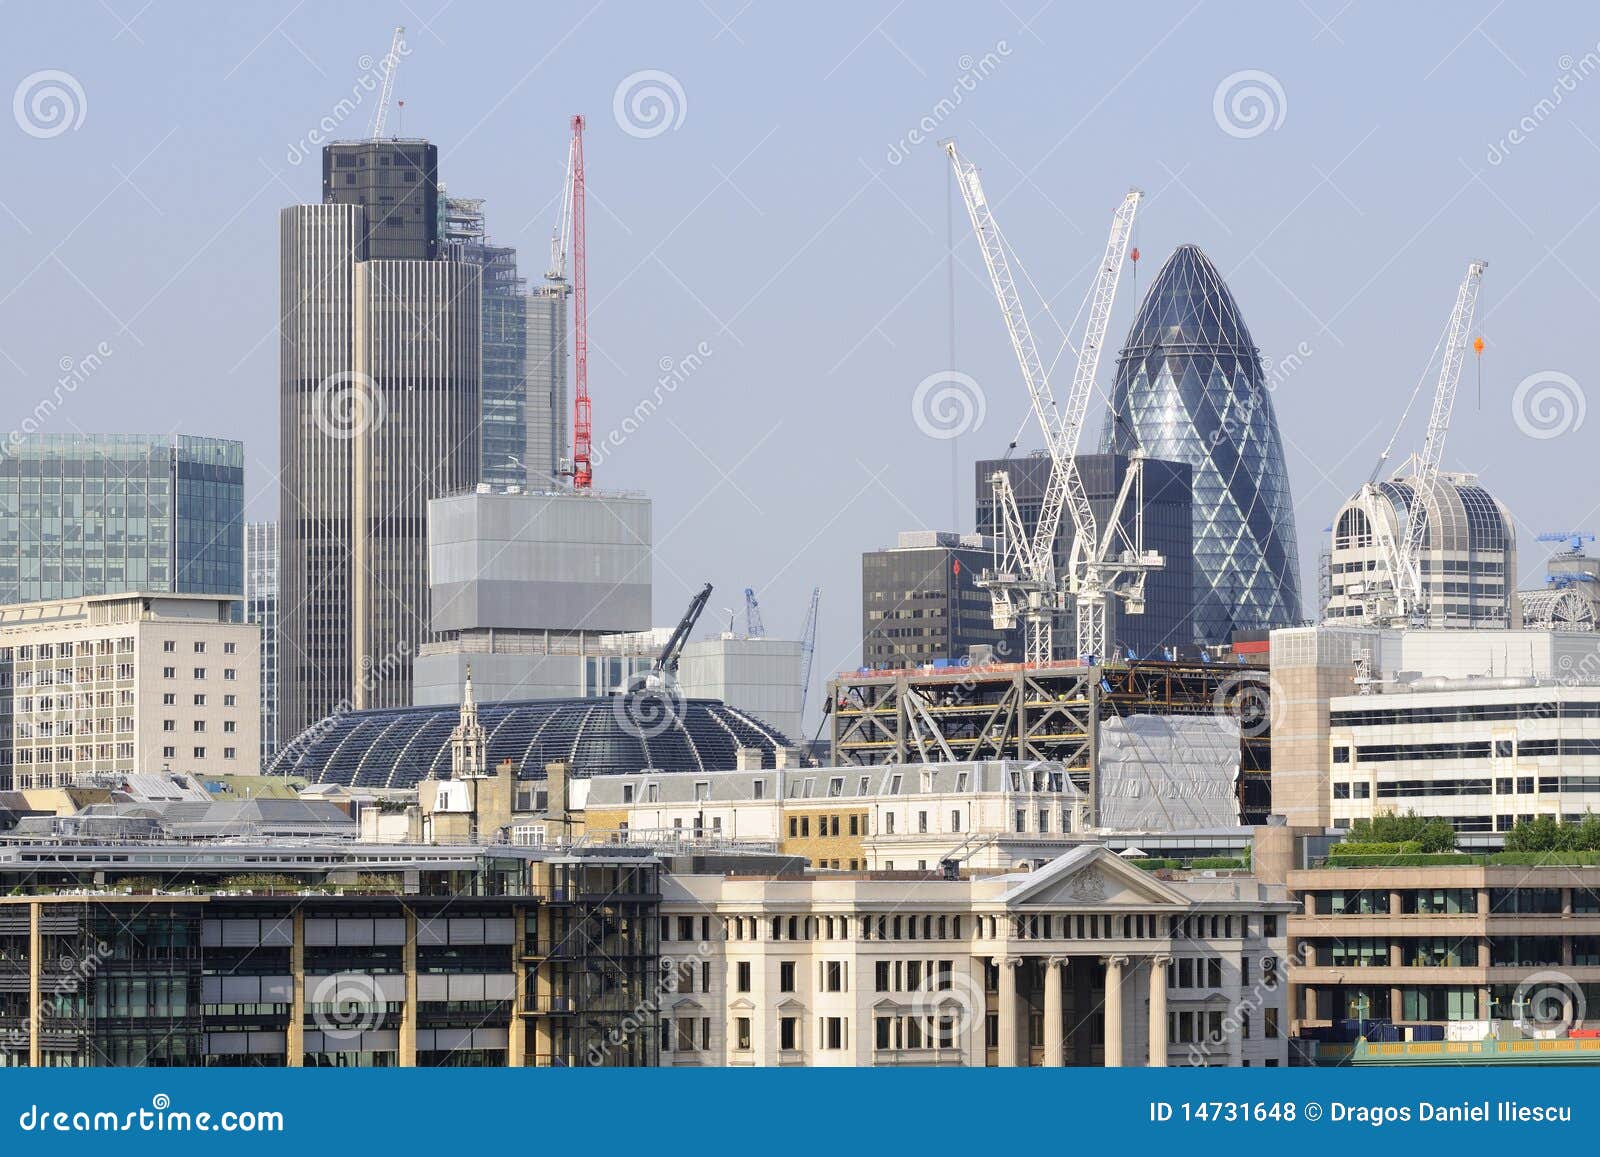 Building Industry Royalty Free Stock Photos - Image: 14731648